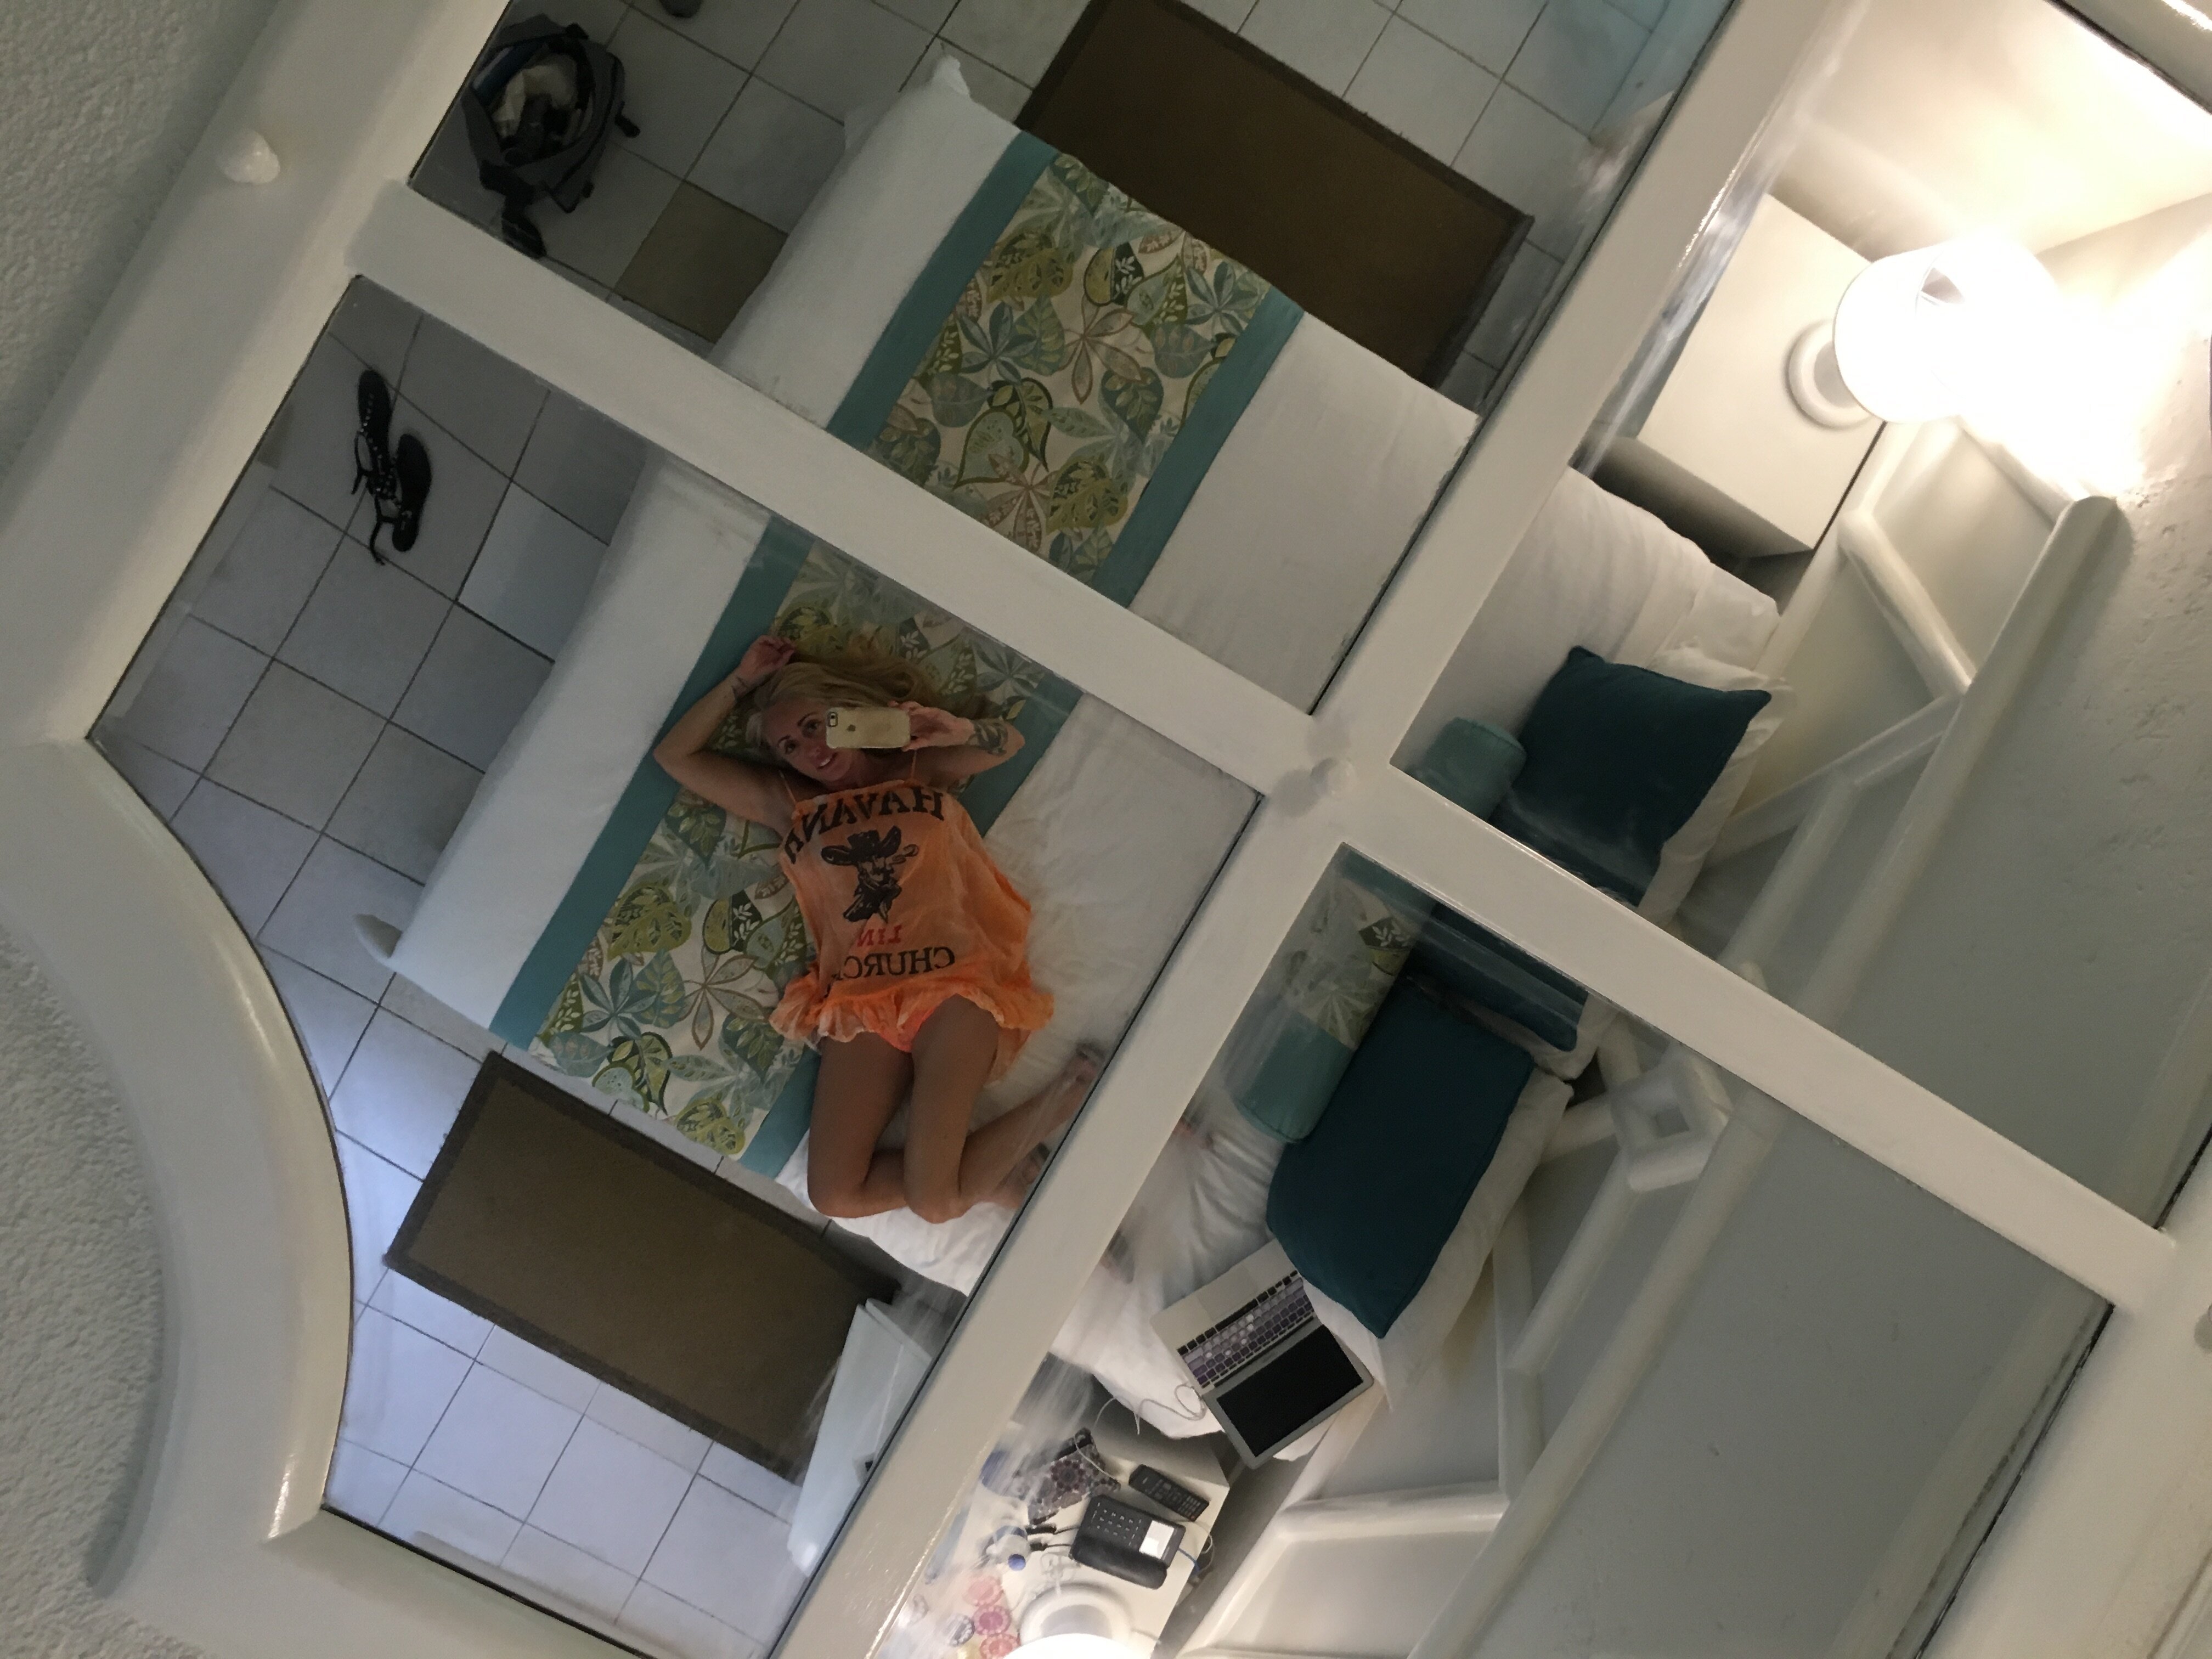 Her room at the resort had a mirrored ceiling, which Block took advantage of to capture this selfie.